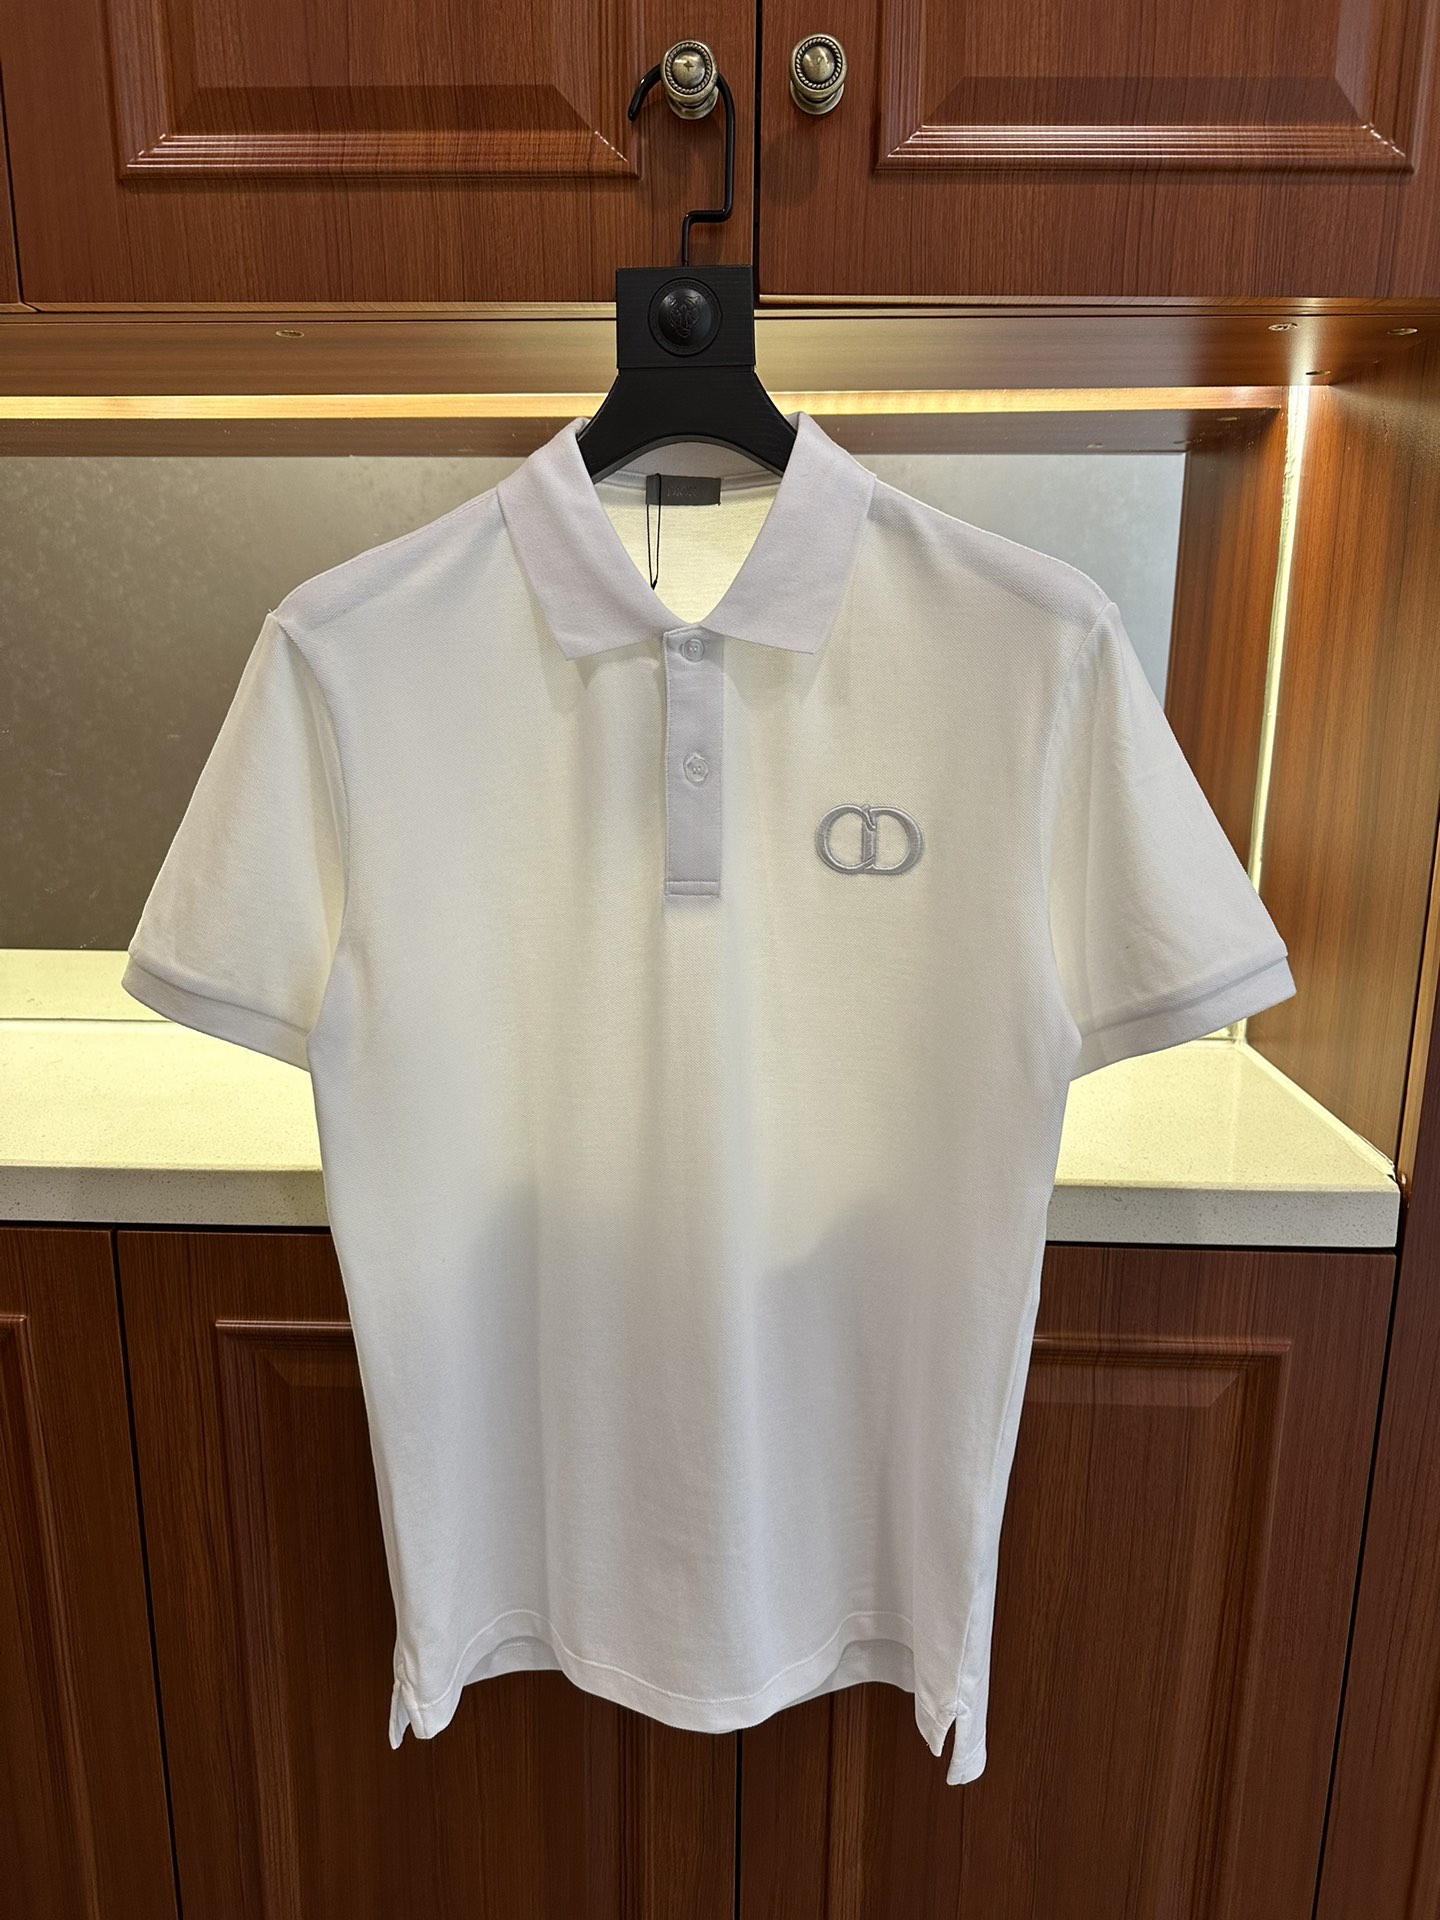 Buy Online
 Dior Clothing Polo T-Shirt Black White Embroidery Cotton Spring/Summer Collection Fashion Short Sleeve